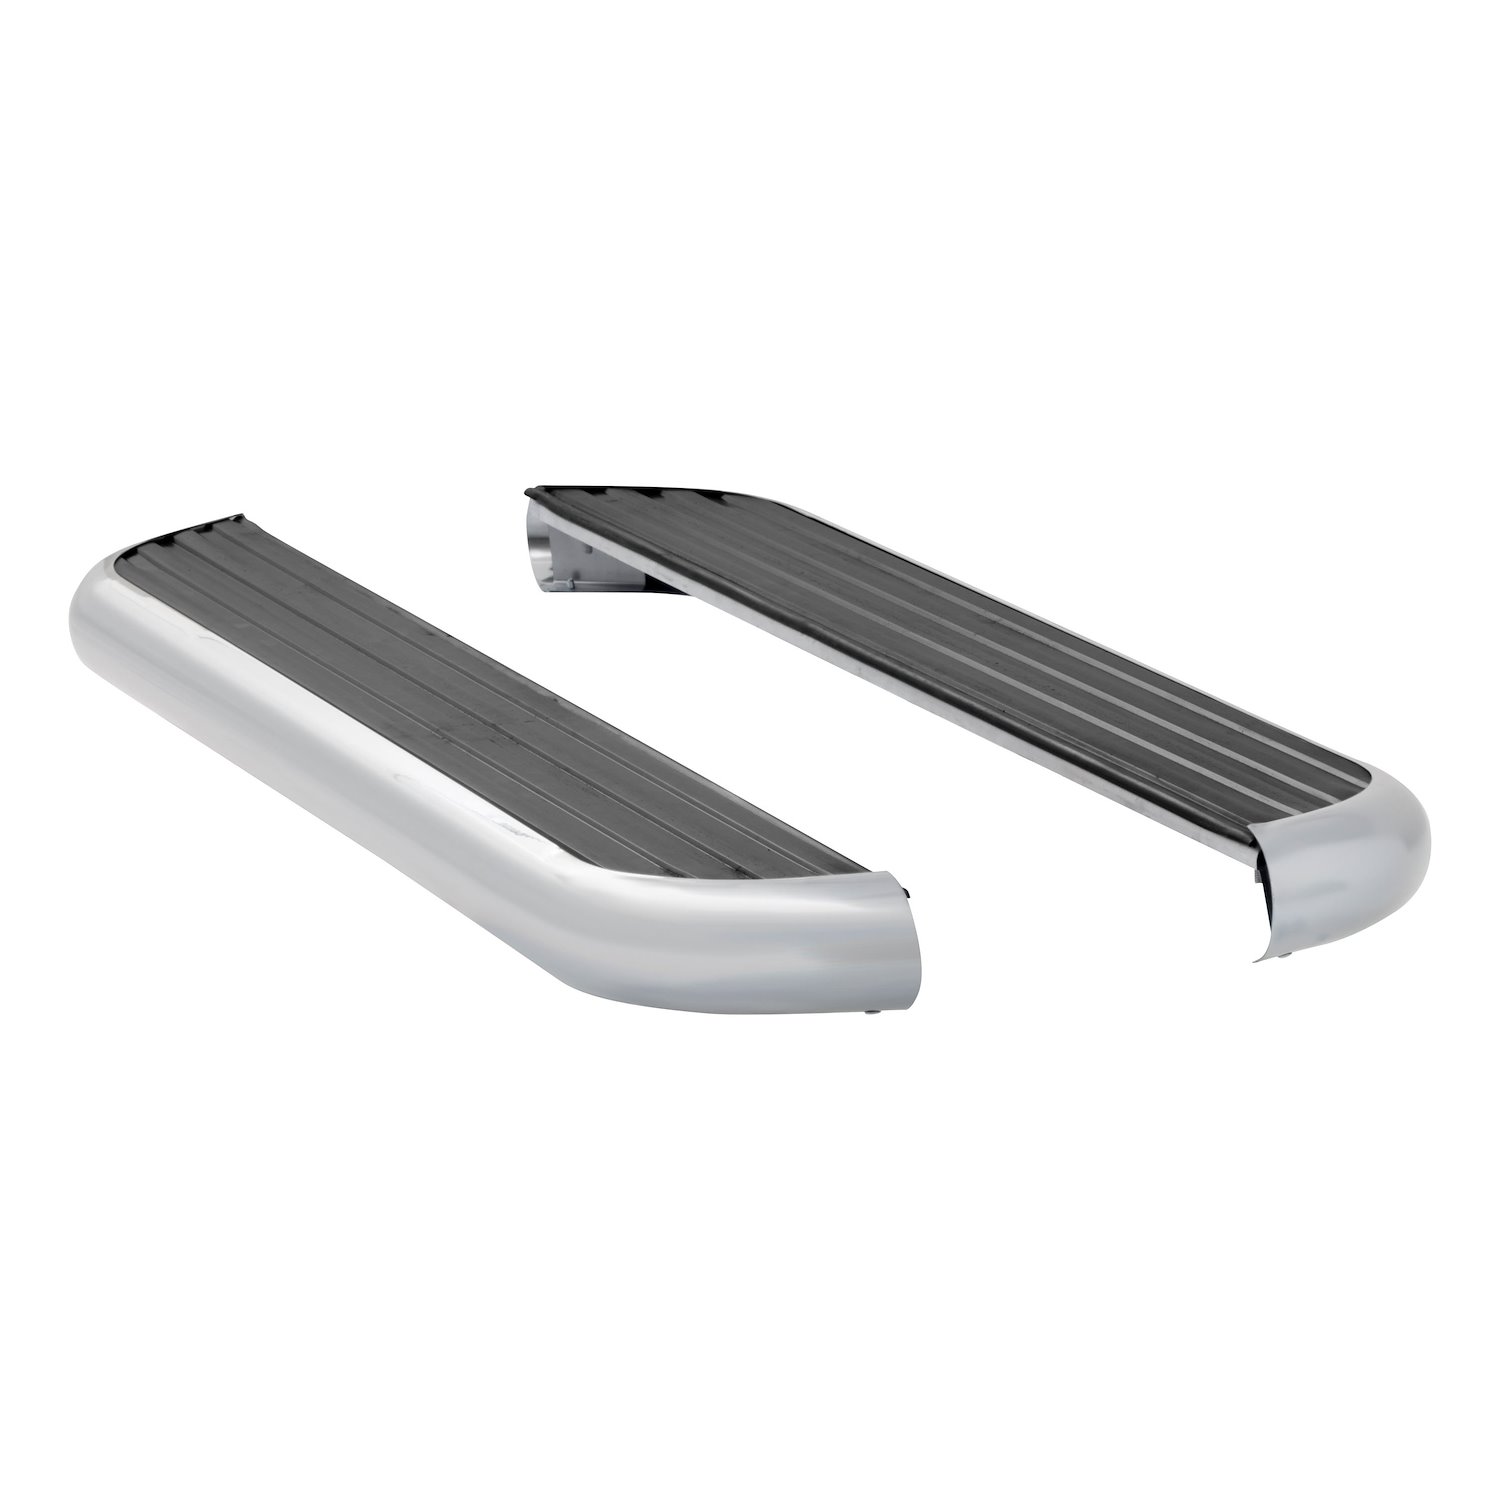 575060-571631 MegaStep 6-1/2 in. x 60 in. Aluminum Running Boards Fits Select Dodge, Ram 1500 to 5500